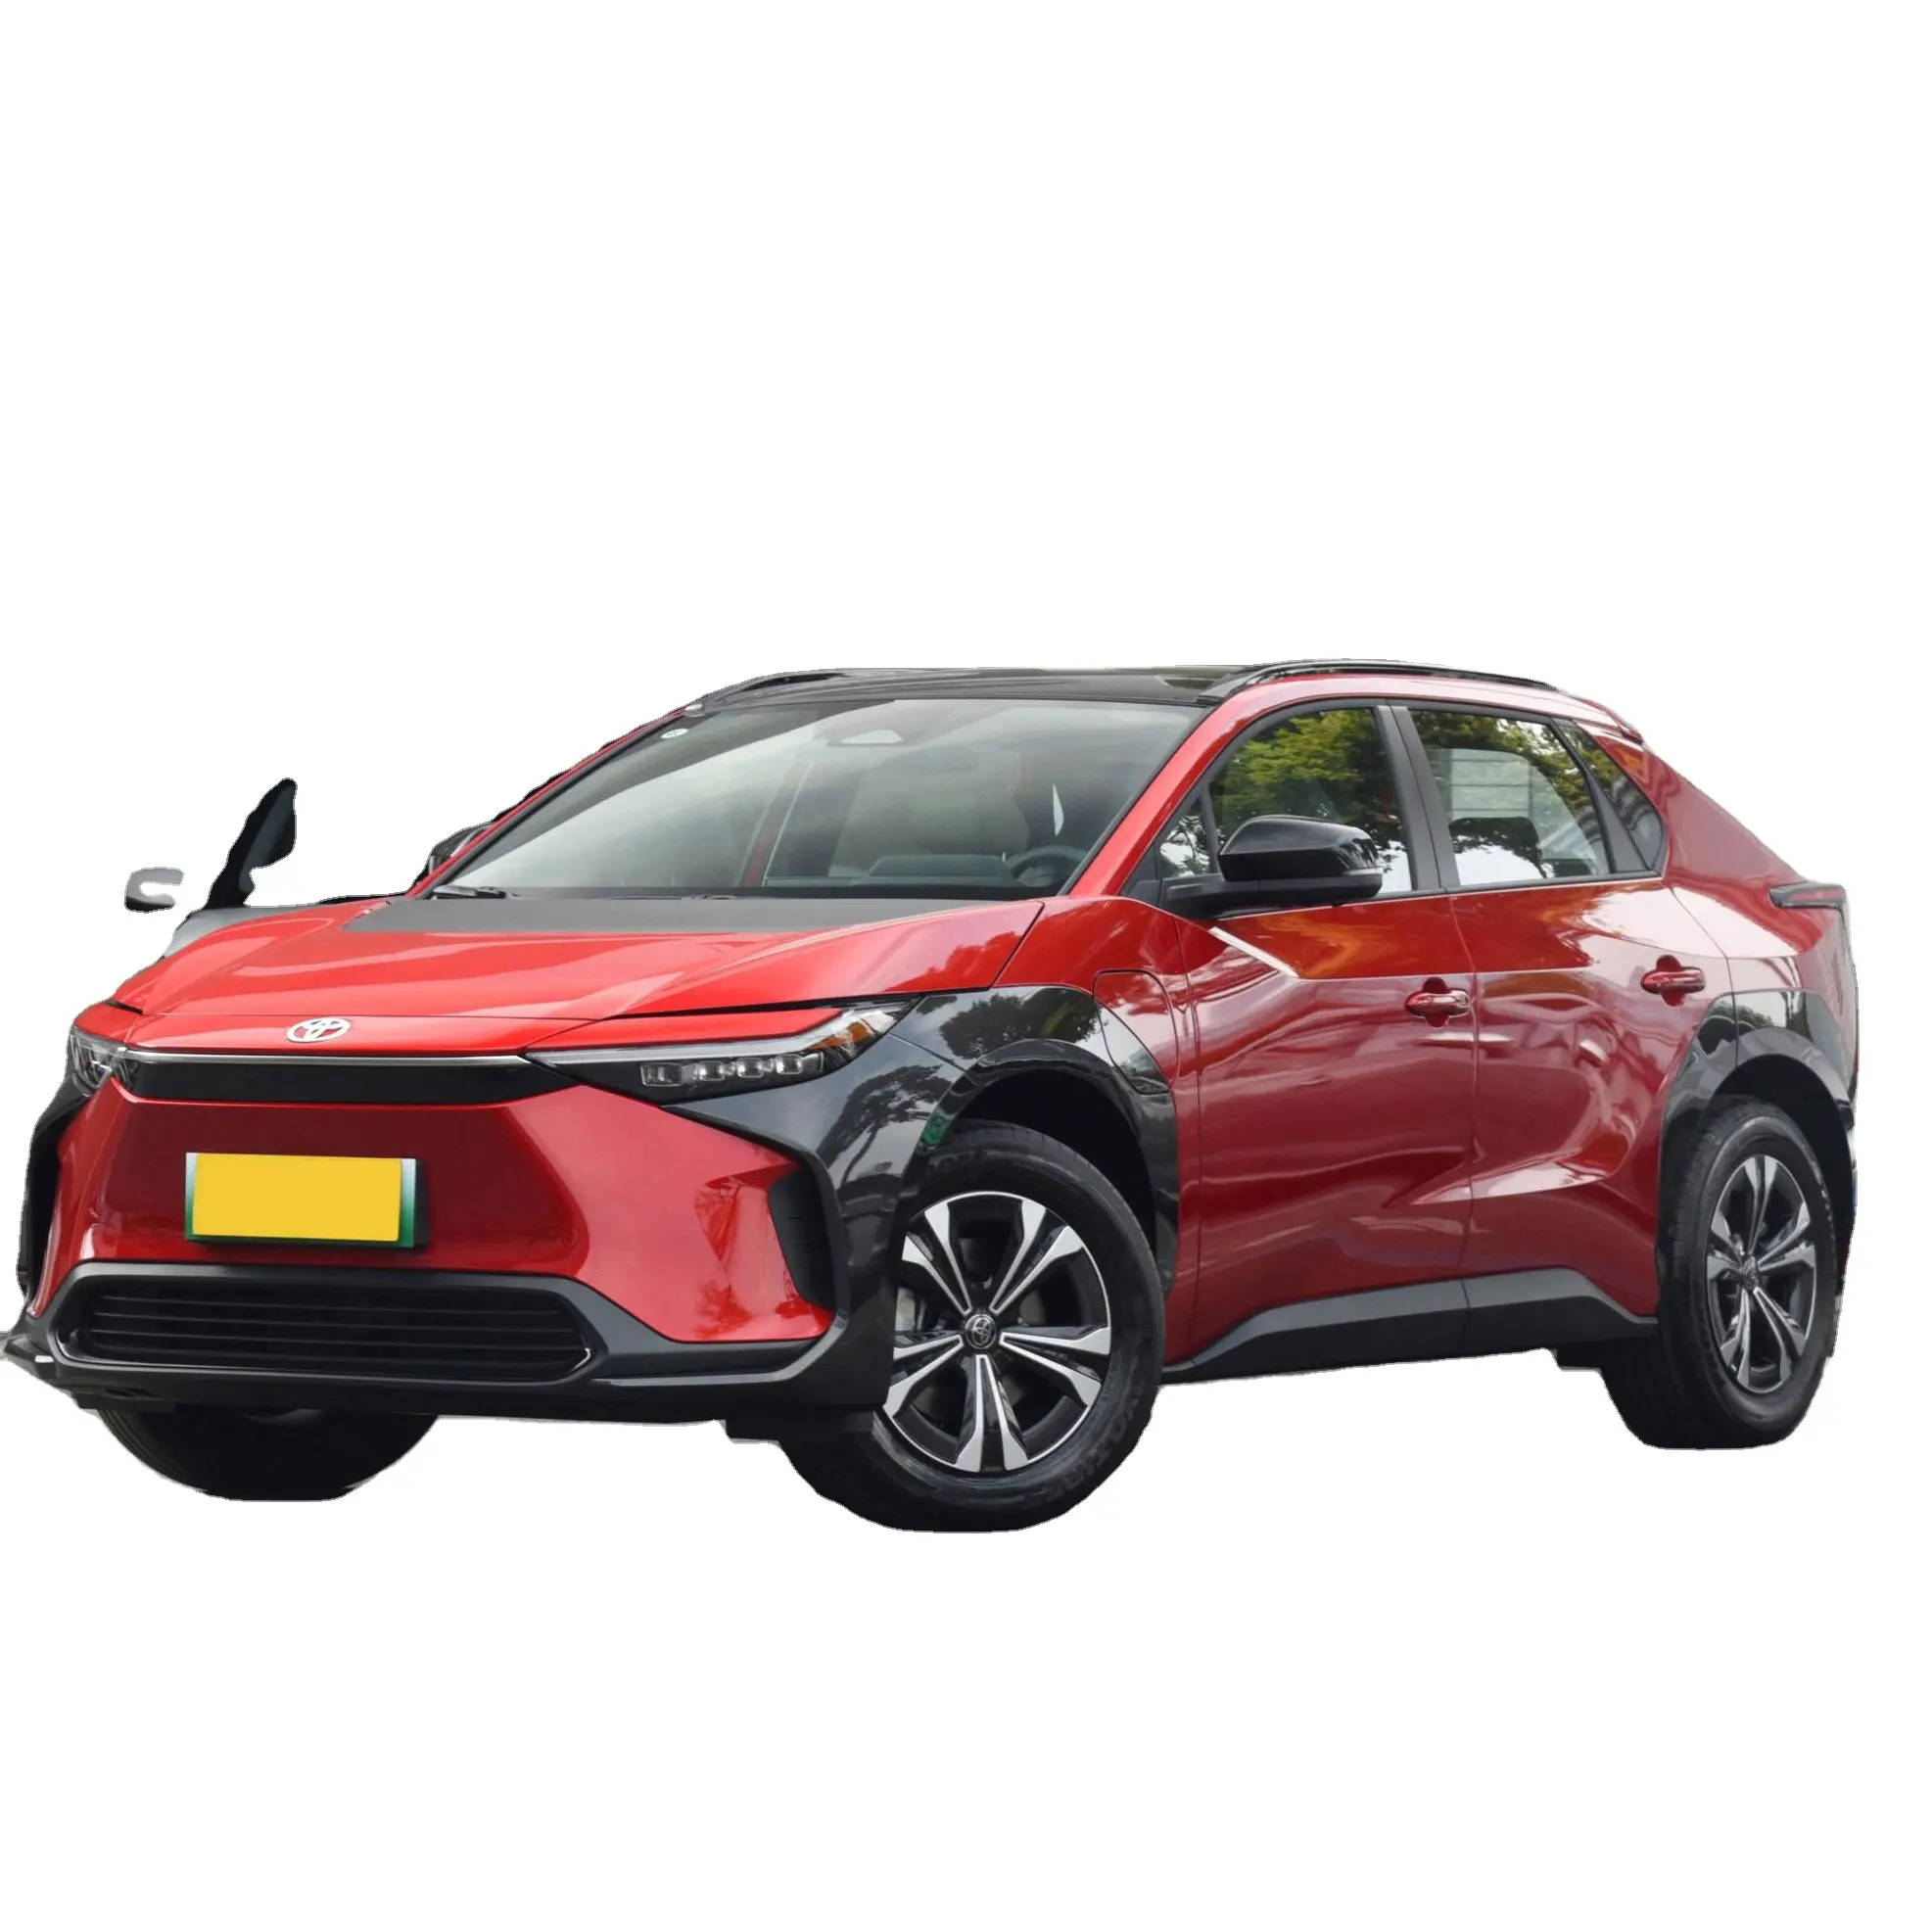 2022 New style Chinese Electric Car Vehicles Used Cars In China New Energy Car GAC Toyata bZ4X 2022 Elite